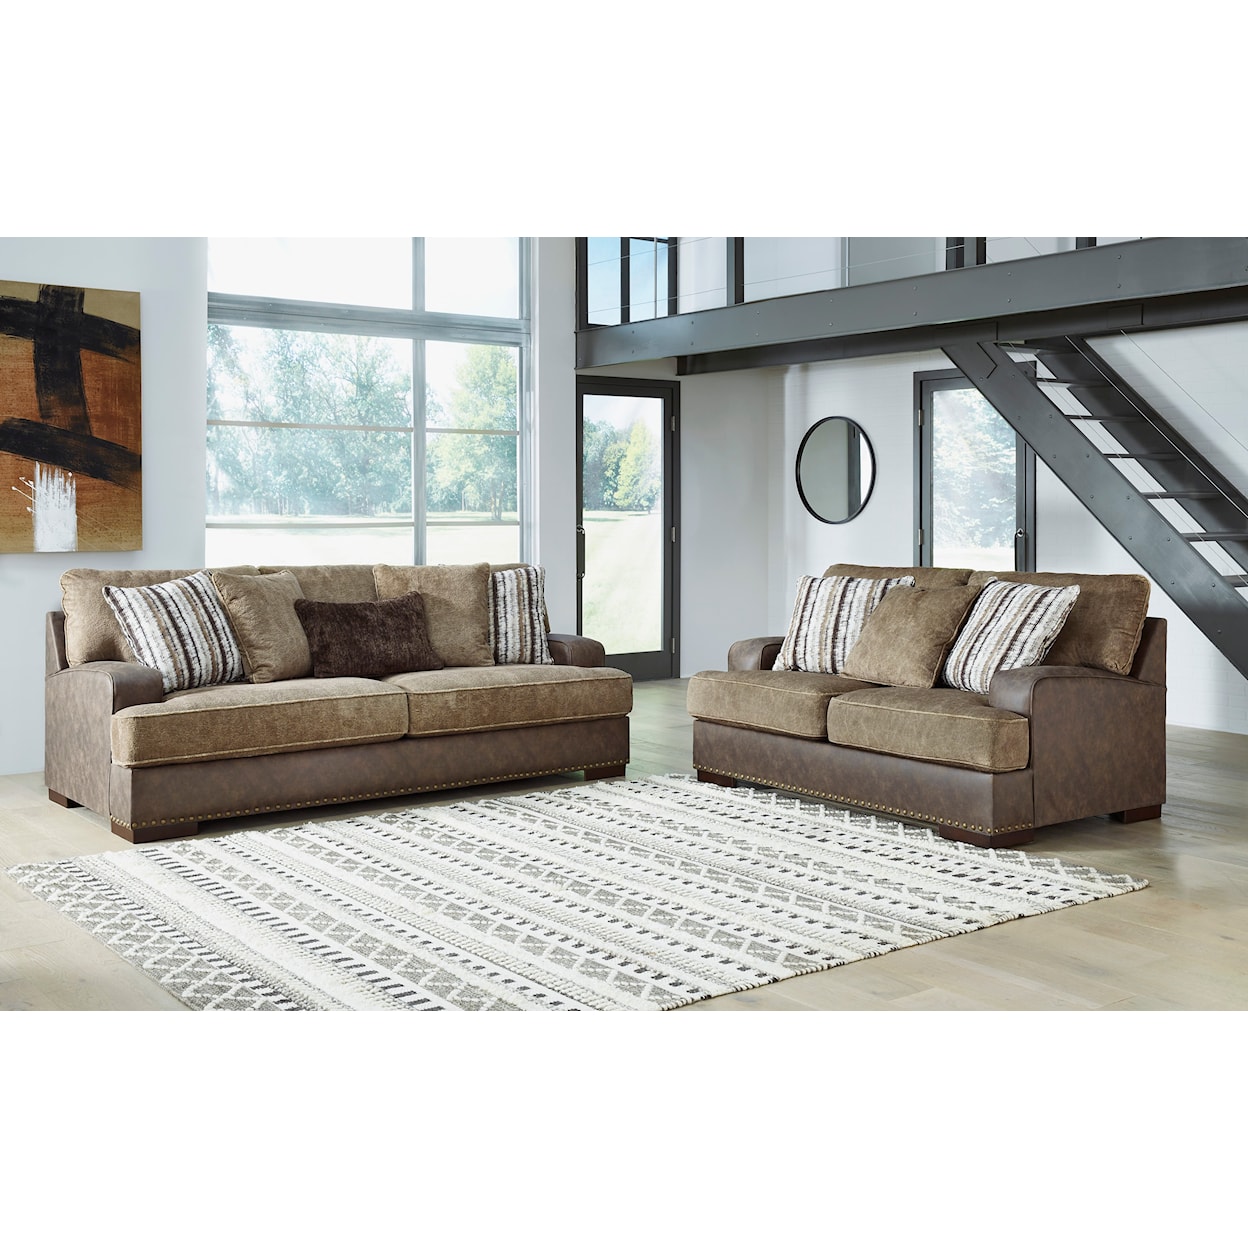 Signature Design by Ashley Alesbury Living Room Set